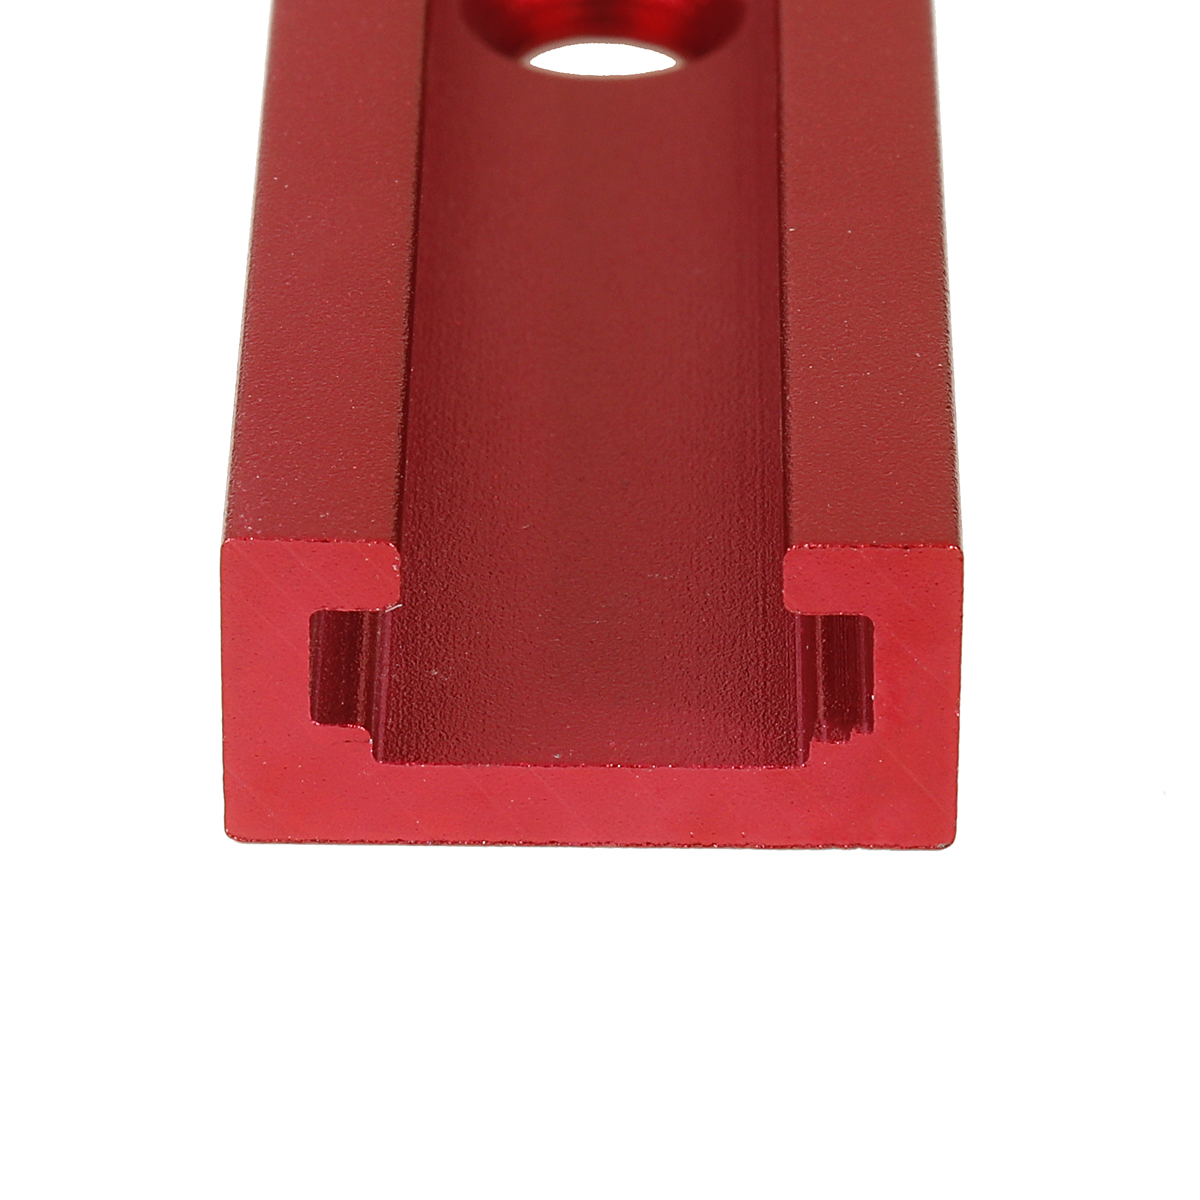 Red-Aluminum-Alloy-300-1220mm-T-track-T-slot-Miter-Track-Jig-T-Screw-Fixture-Slot-19x95mm-For-Table--1682608-6